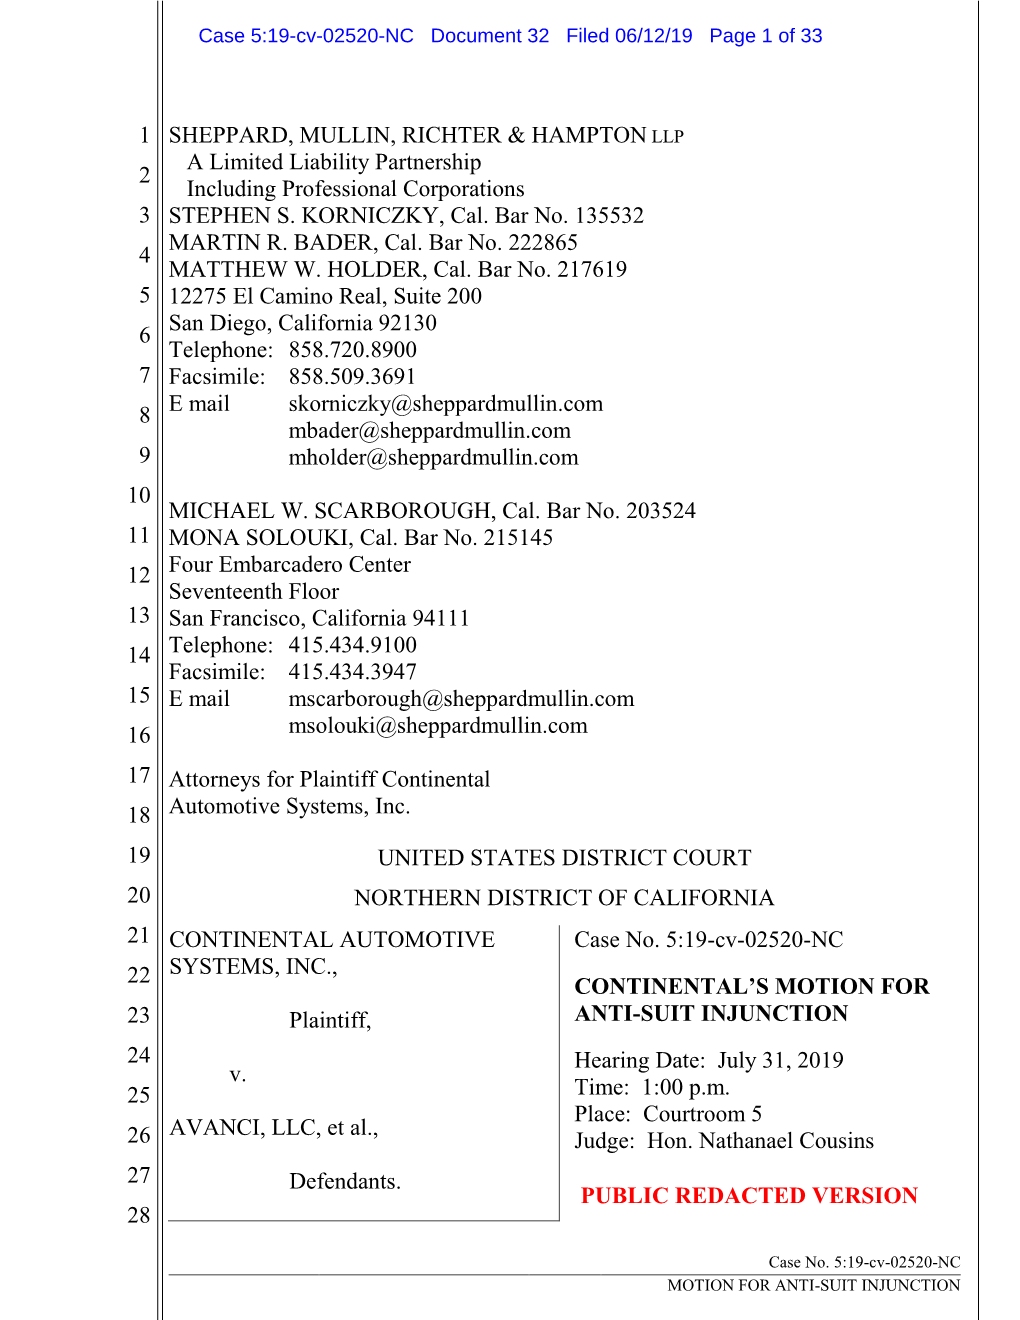 MOTION for ANTI-SUIT INJUNCTION Case 5:19-Cv-02520-NC Document 32 Filed 06/12/19 Page 2 of 33